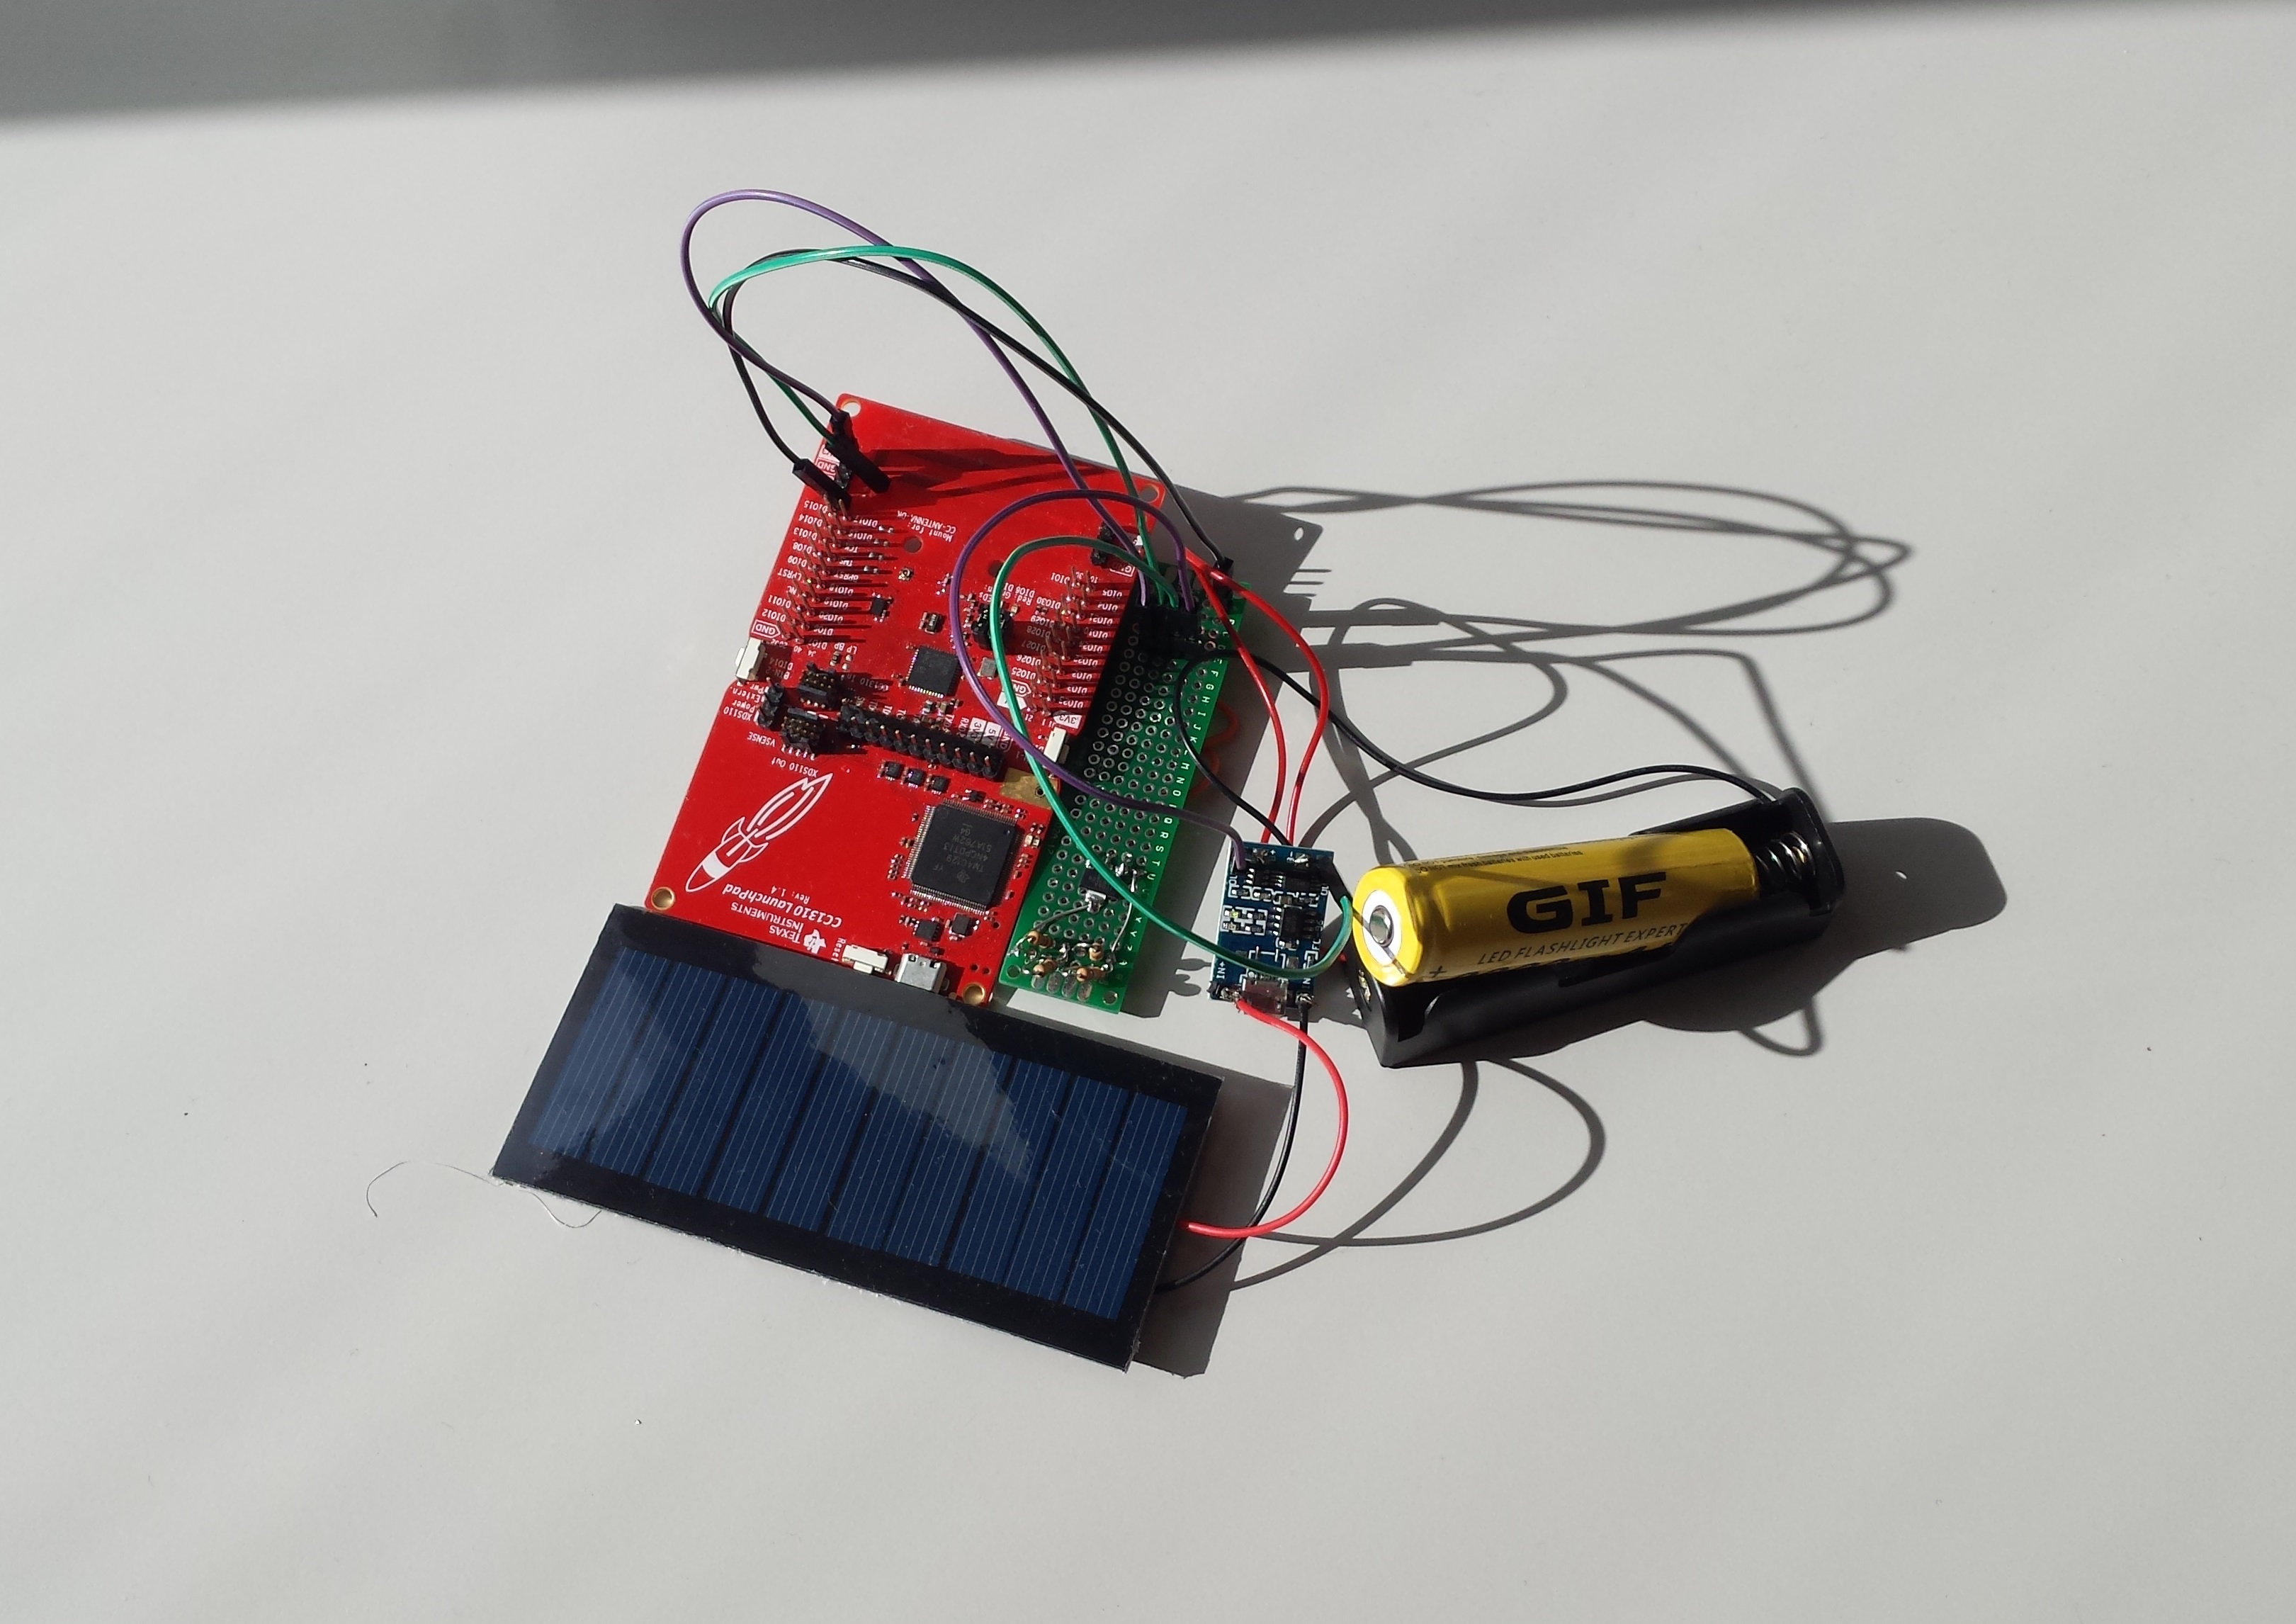 IoT prototype hardware that consists of a solar cell, one rechargeable battery, and one wireless TI Launchpad device